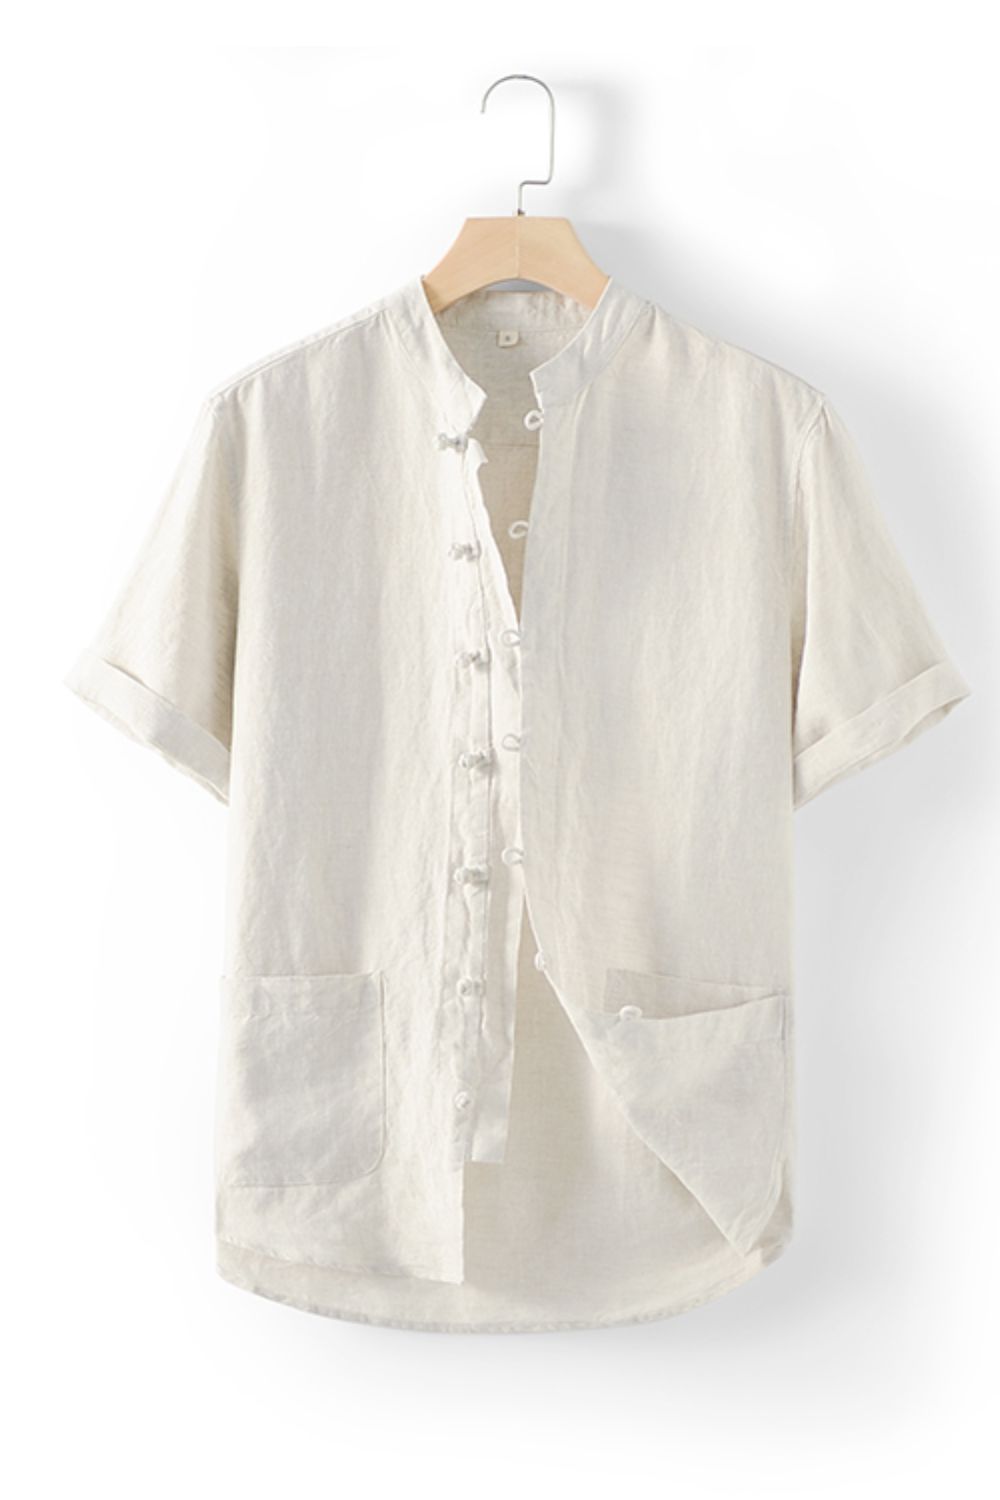 Buttoned Round Neck Short Sleeve Linen Shirt with Pockets_1